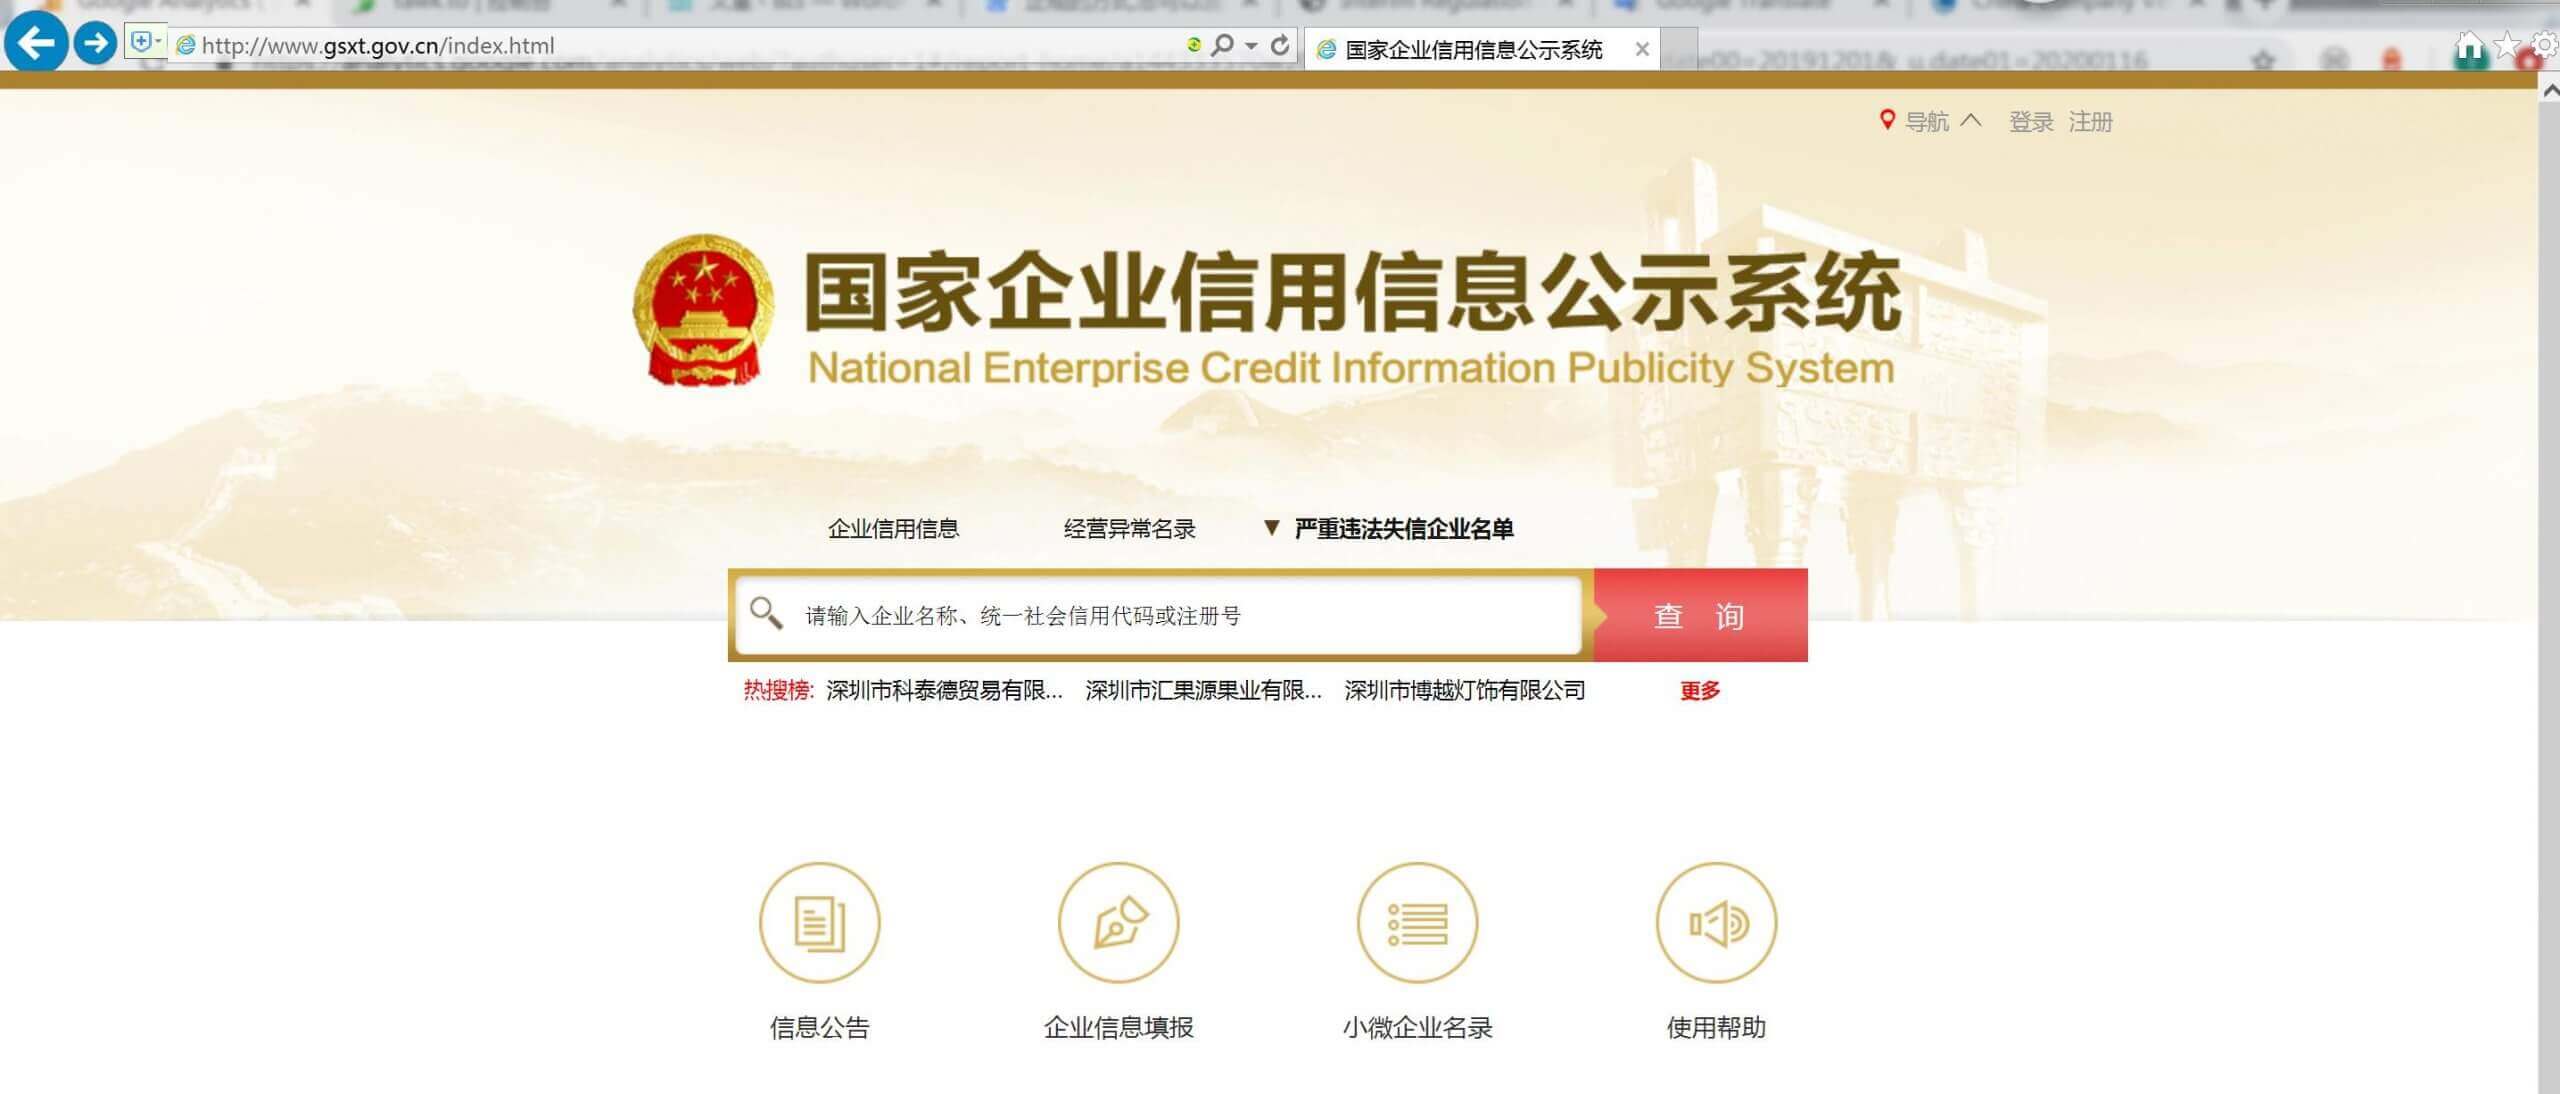 Chinese company's public credit system